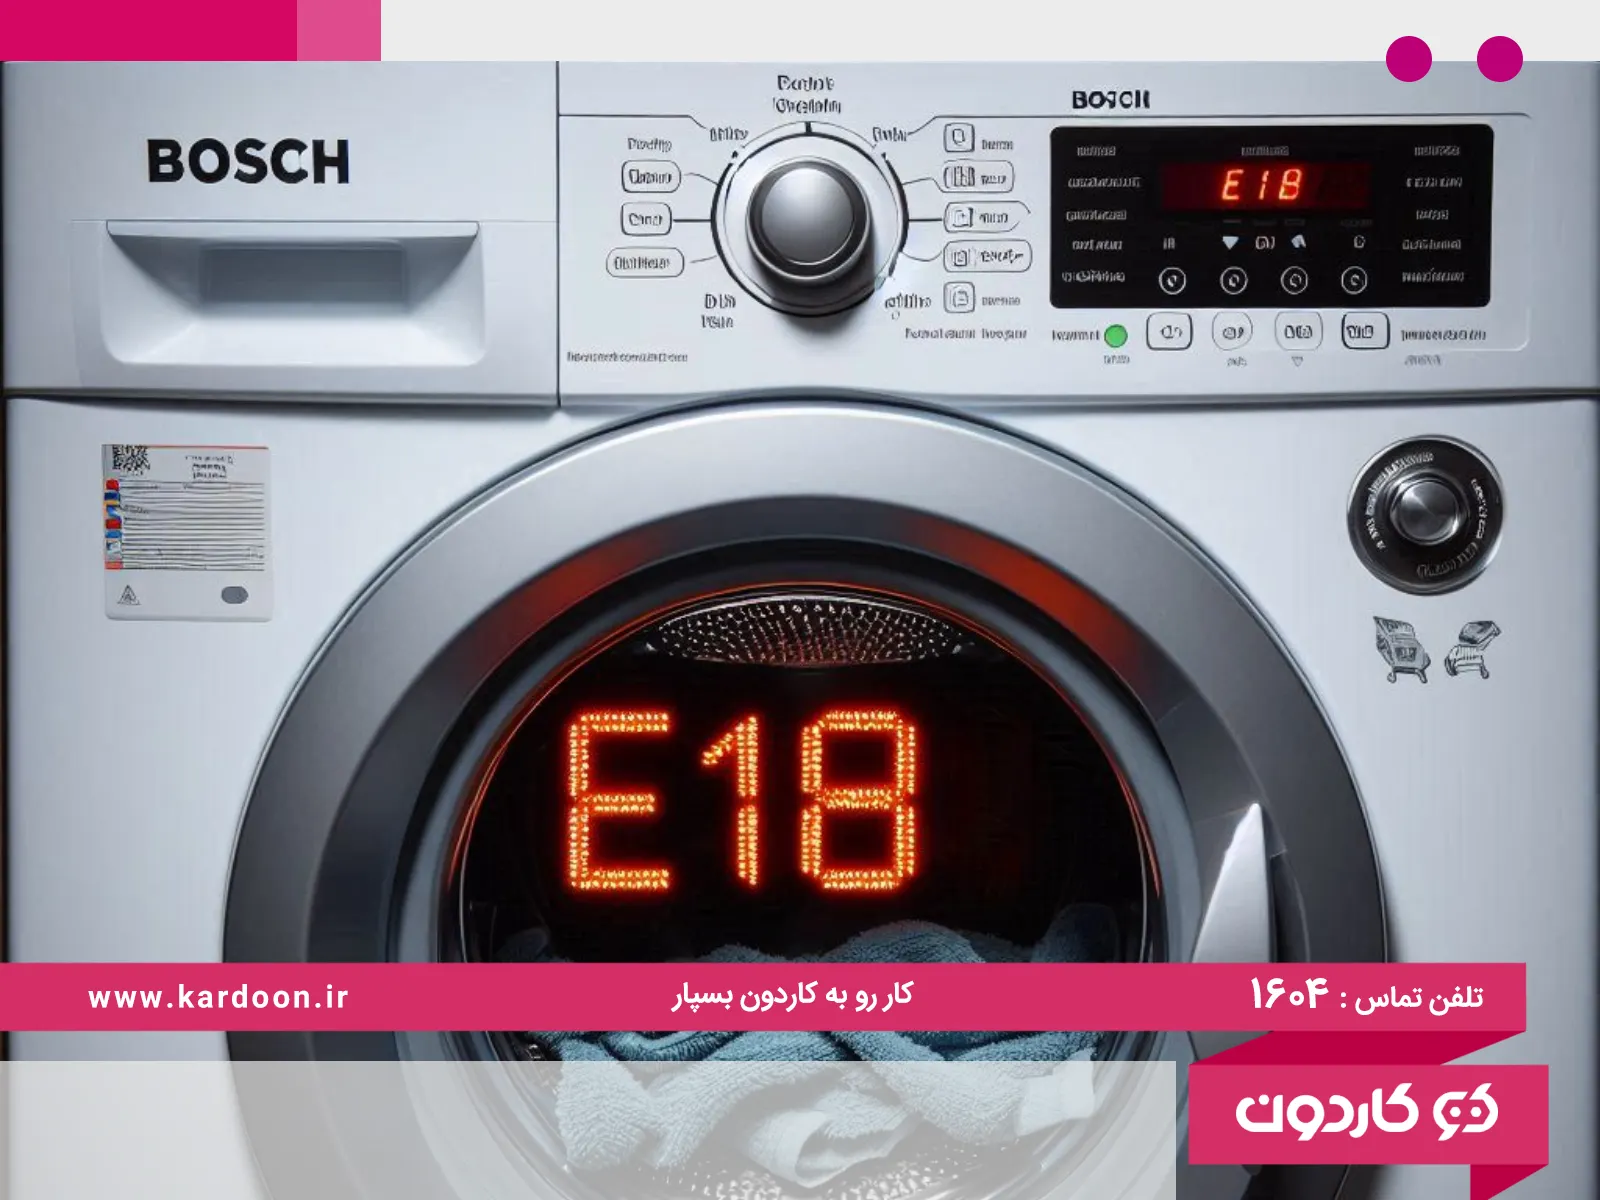 The cause of error e18 of the Bosch washing machine